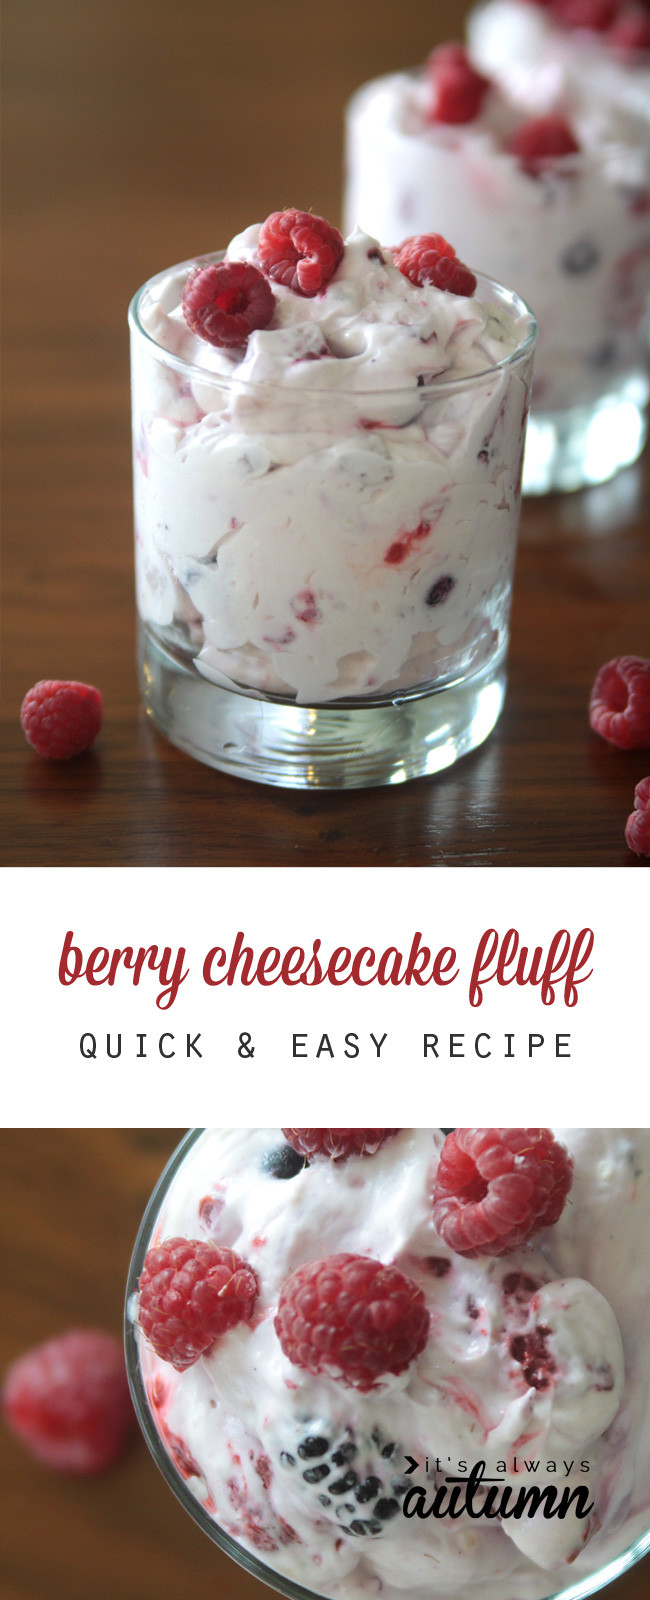 Easy Desserts For Christmas
 berry cheesecake fluff a lighter holiday dessert It s